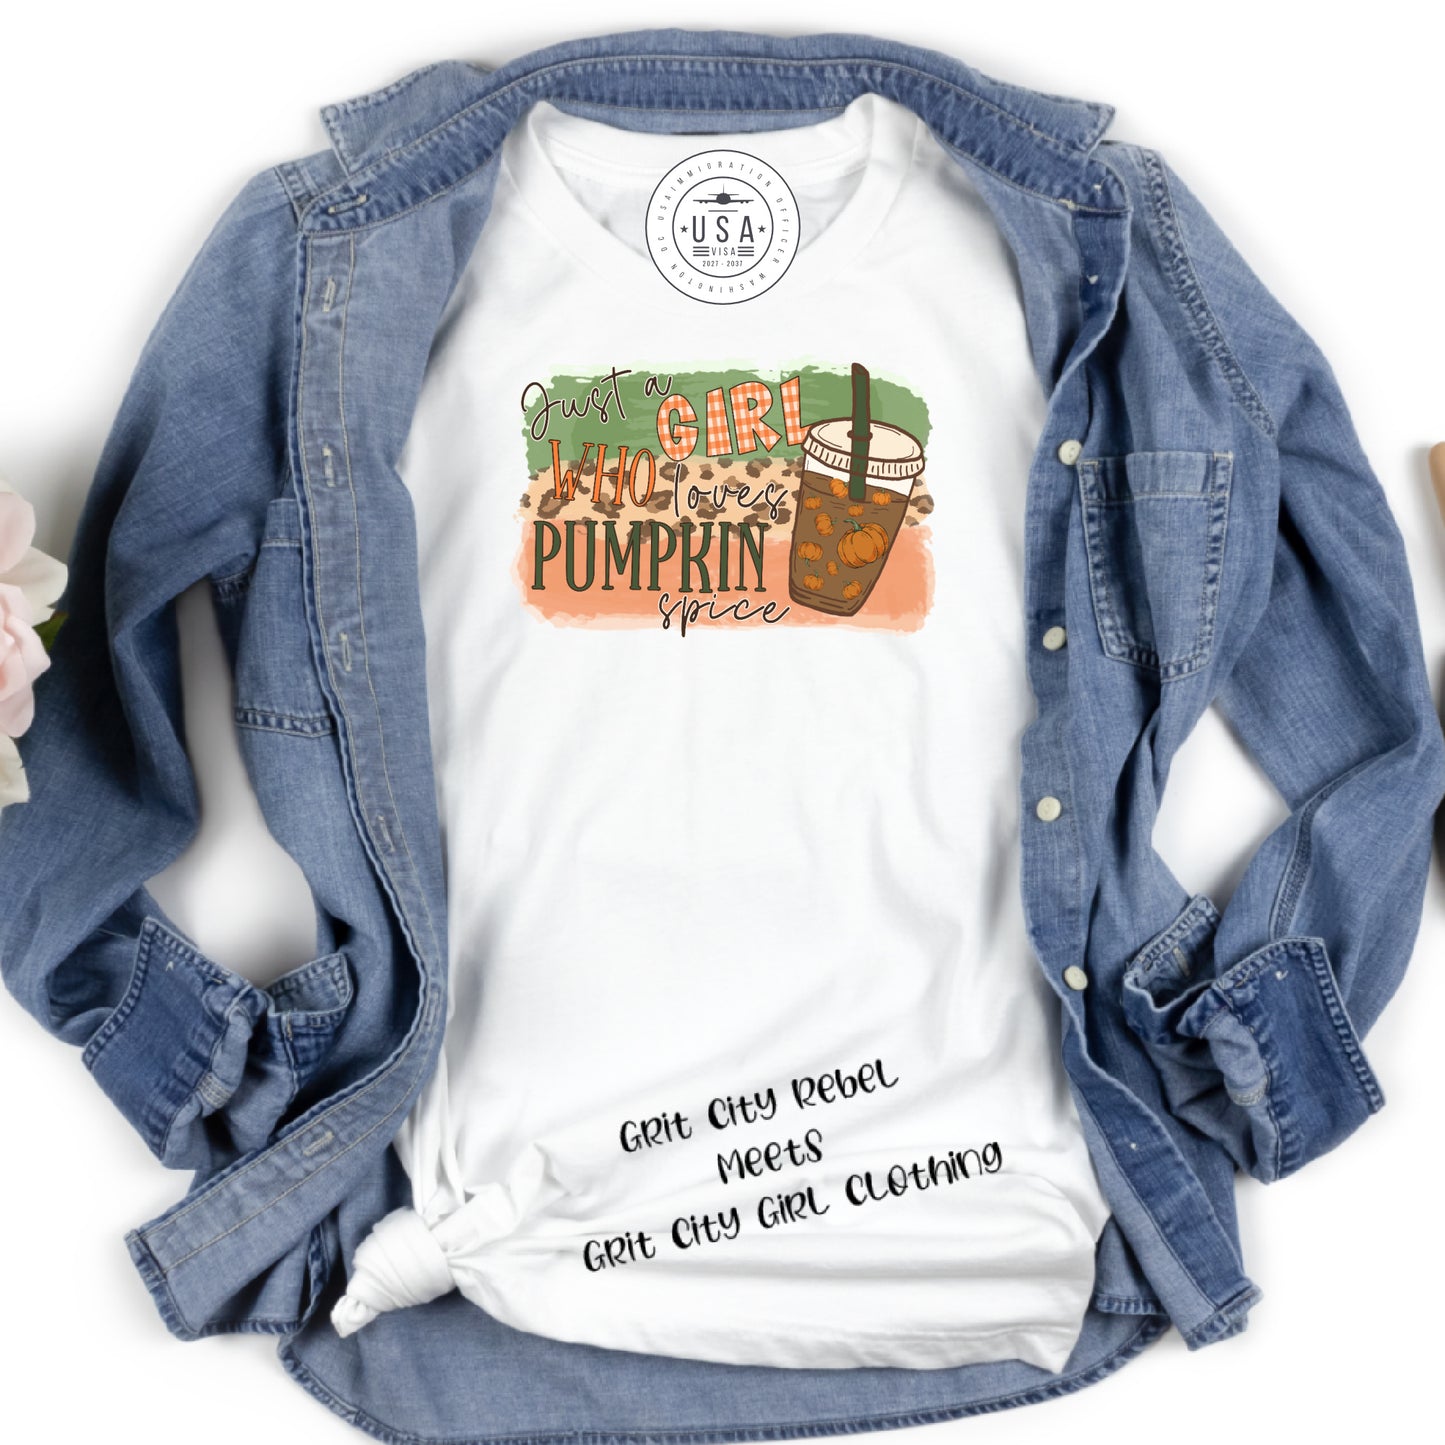 jusr a girl who loves pumpkin in fall grahic colors on a white T-shirt Grit City Rebel sizing unisex sizes small, medium, large, Xlarge, 2X, 3X 